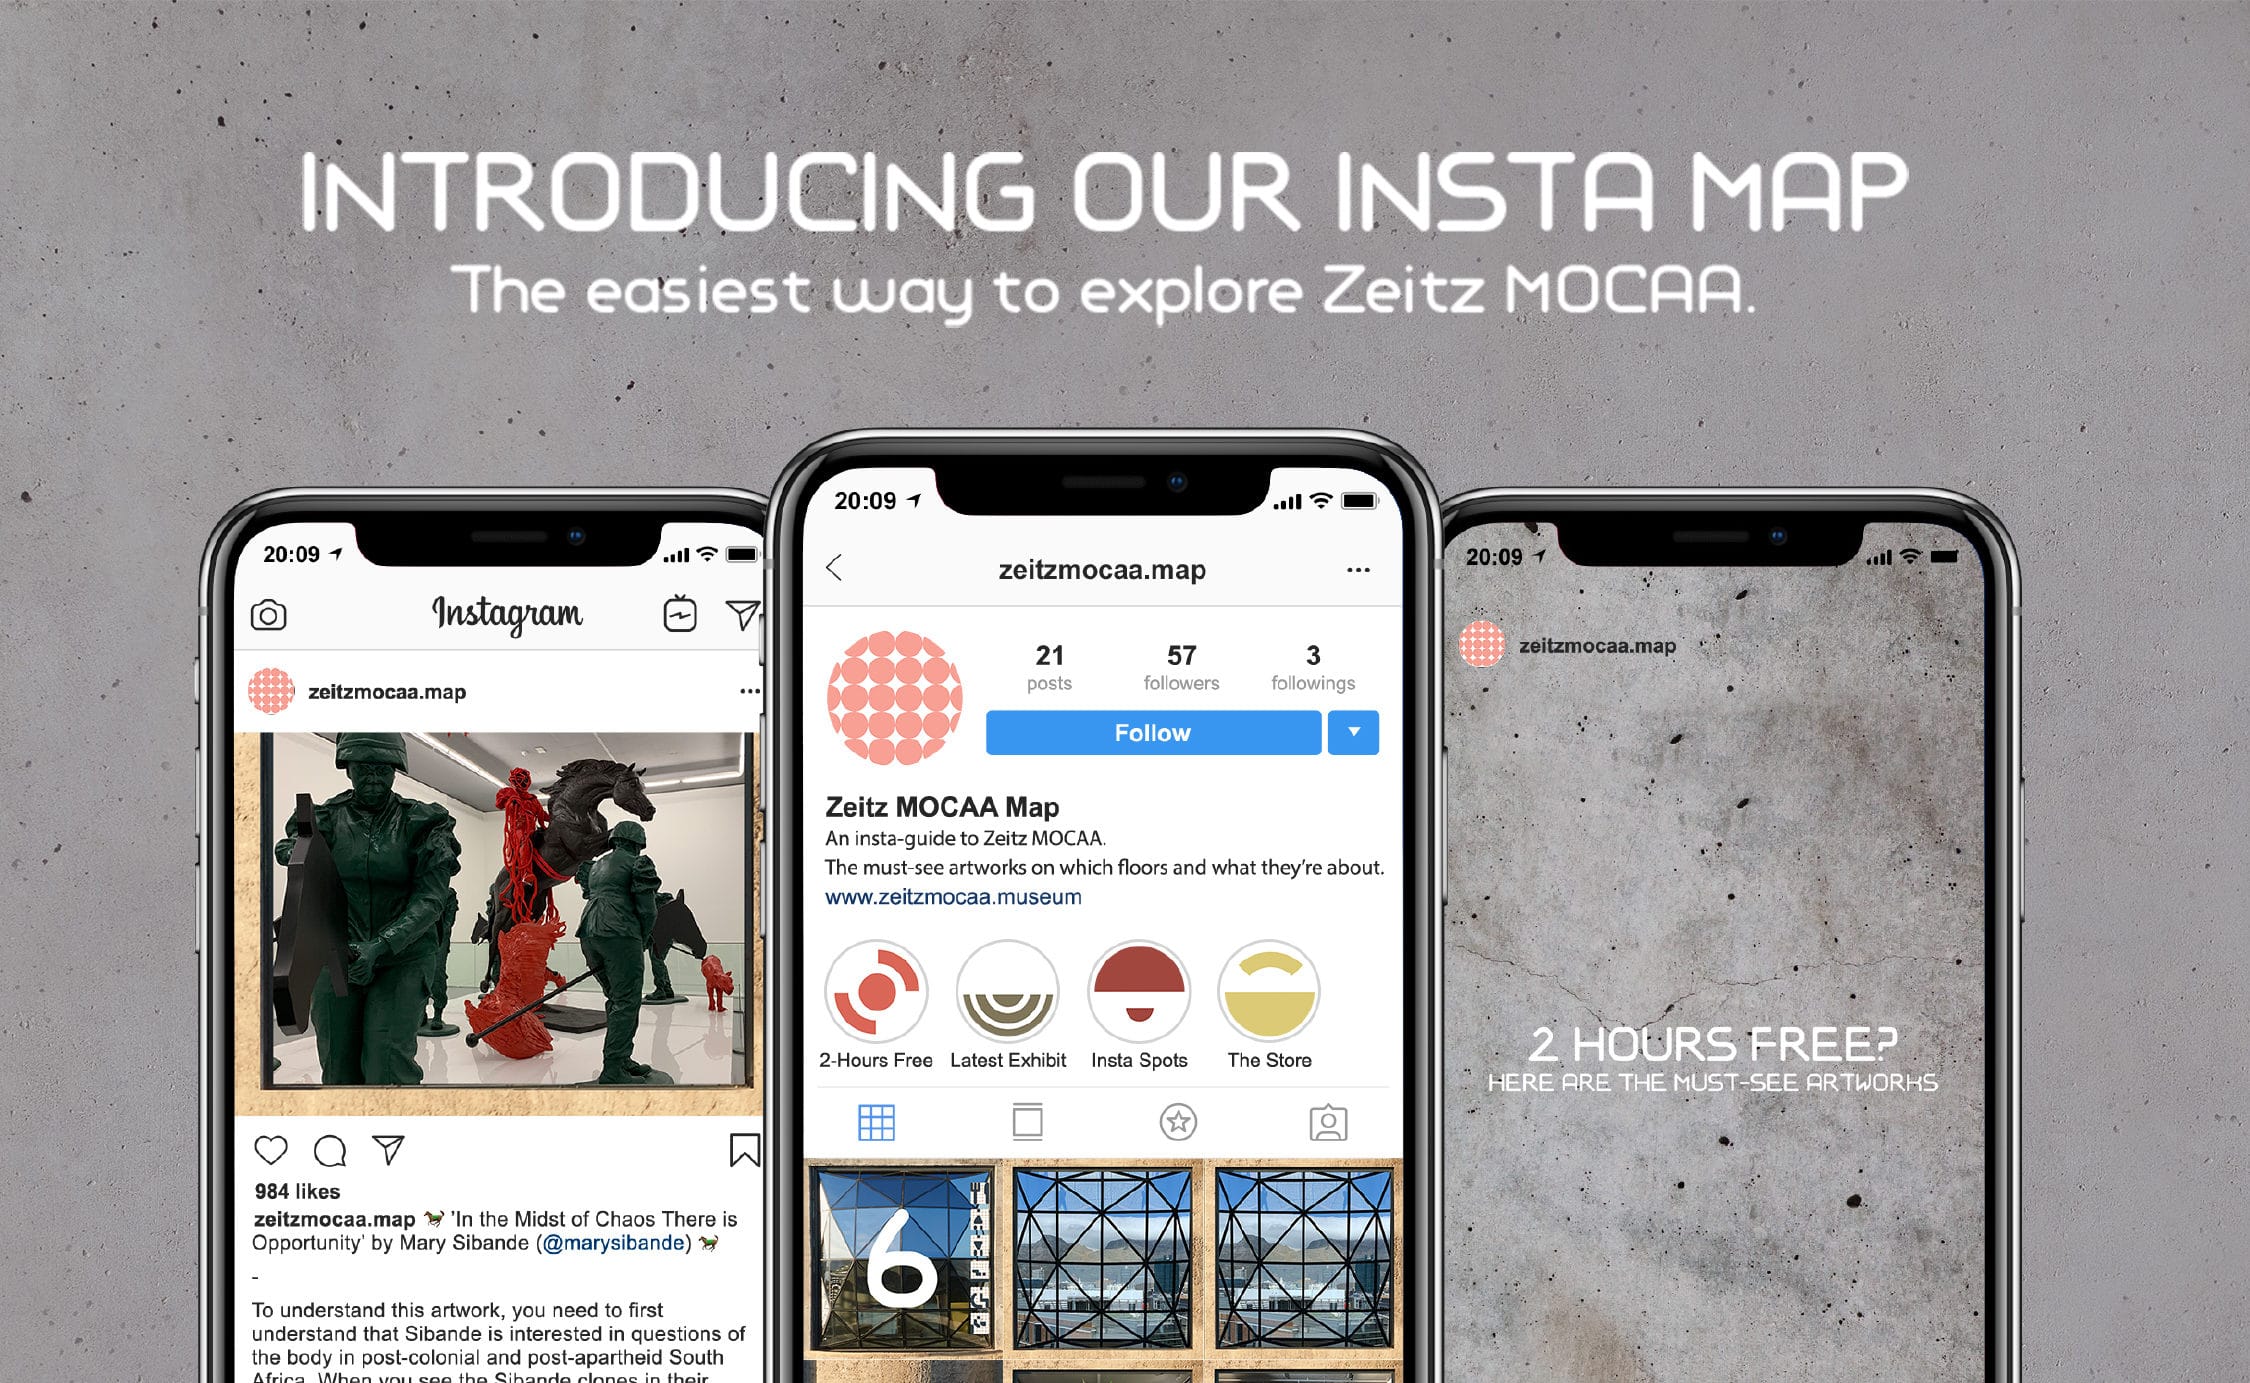 Zeitz MOCAA Insta Map: The first museum guide to be created on Instagram